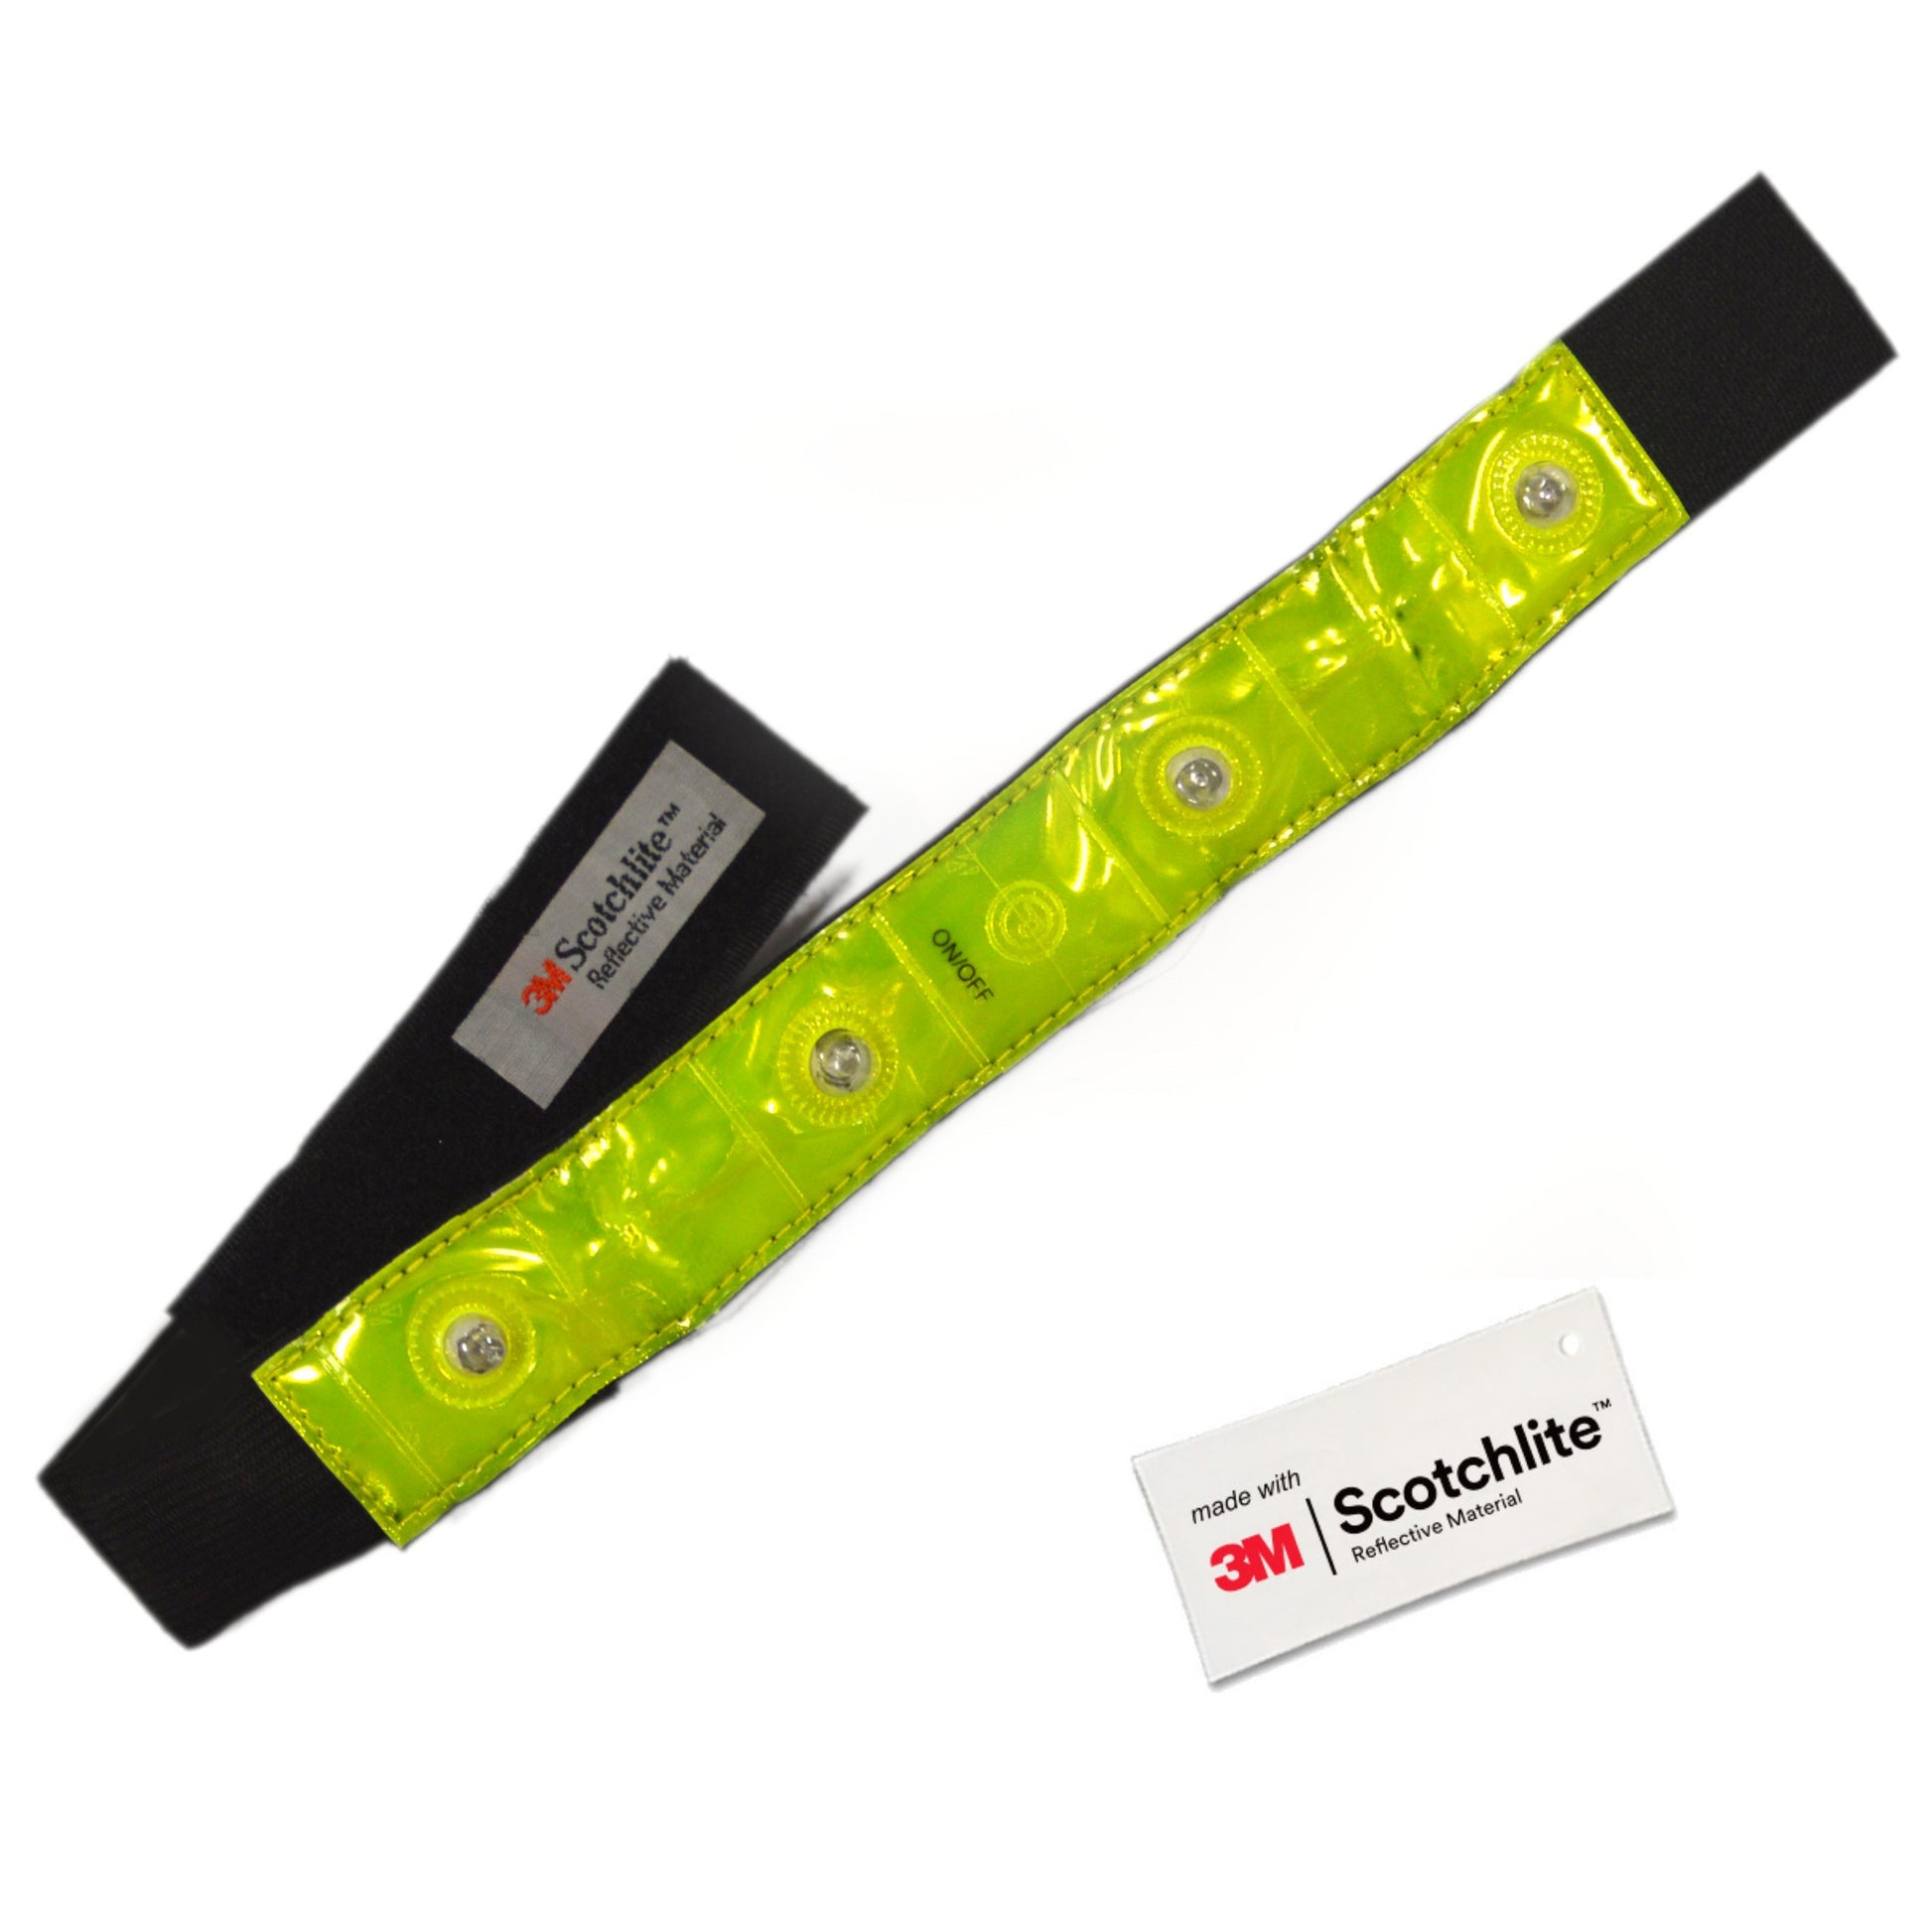 Single Yellow reflective band lay flat, showing 4 led lights turned off.